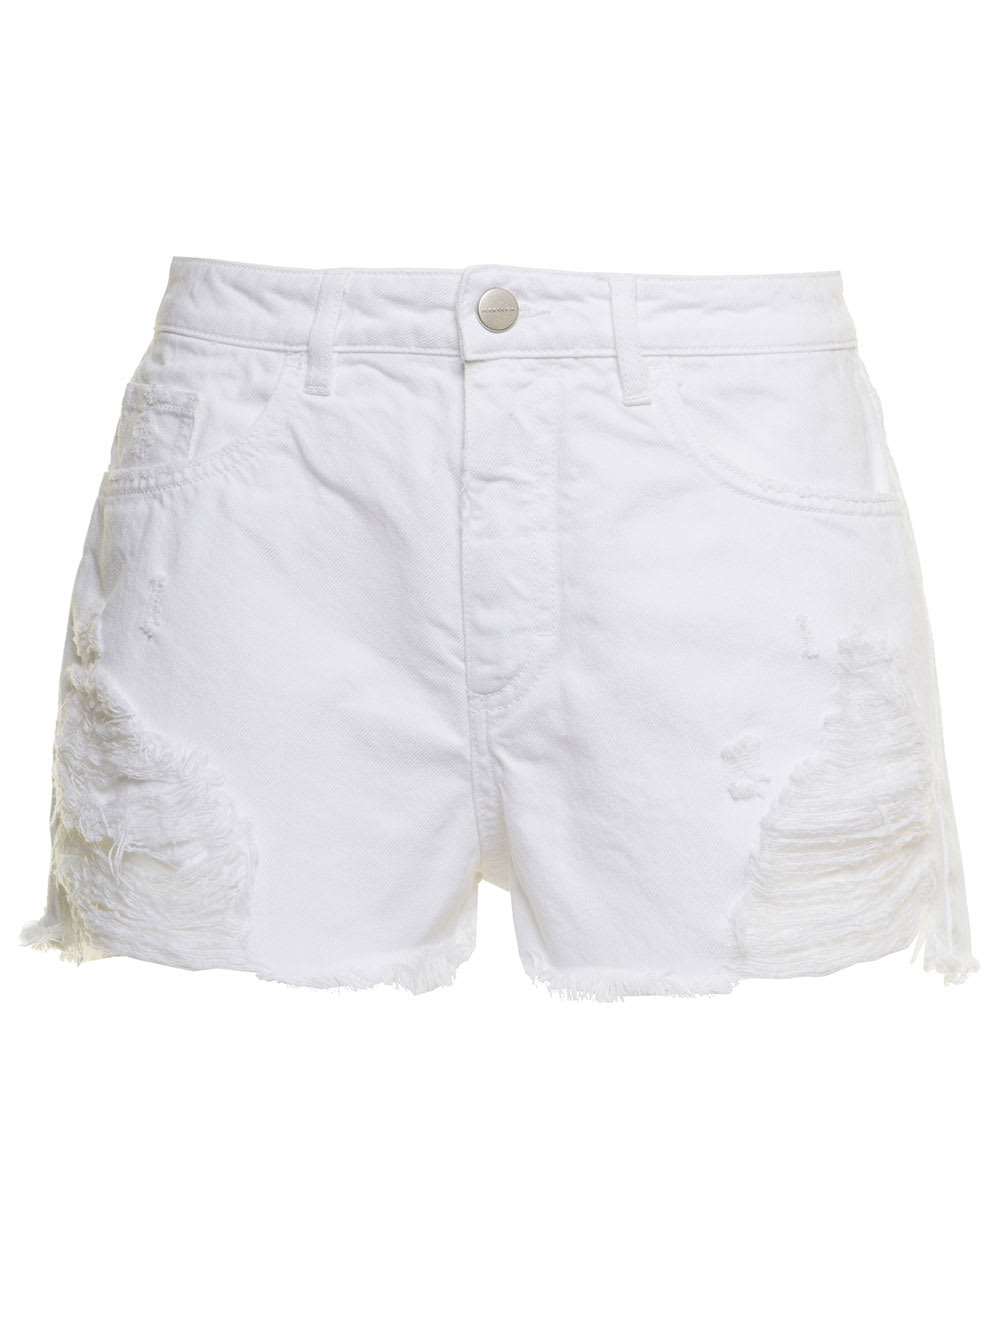 ICON DENIM ICON DENIM WOMAN WHITE LESLIE SHORTS WITH RIPPED INSERTS